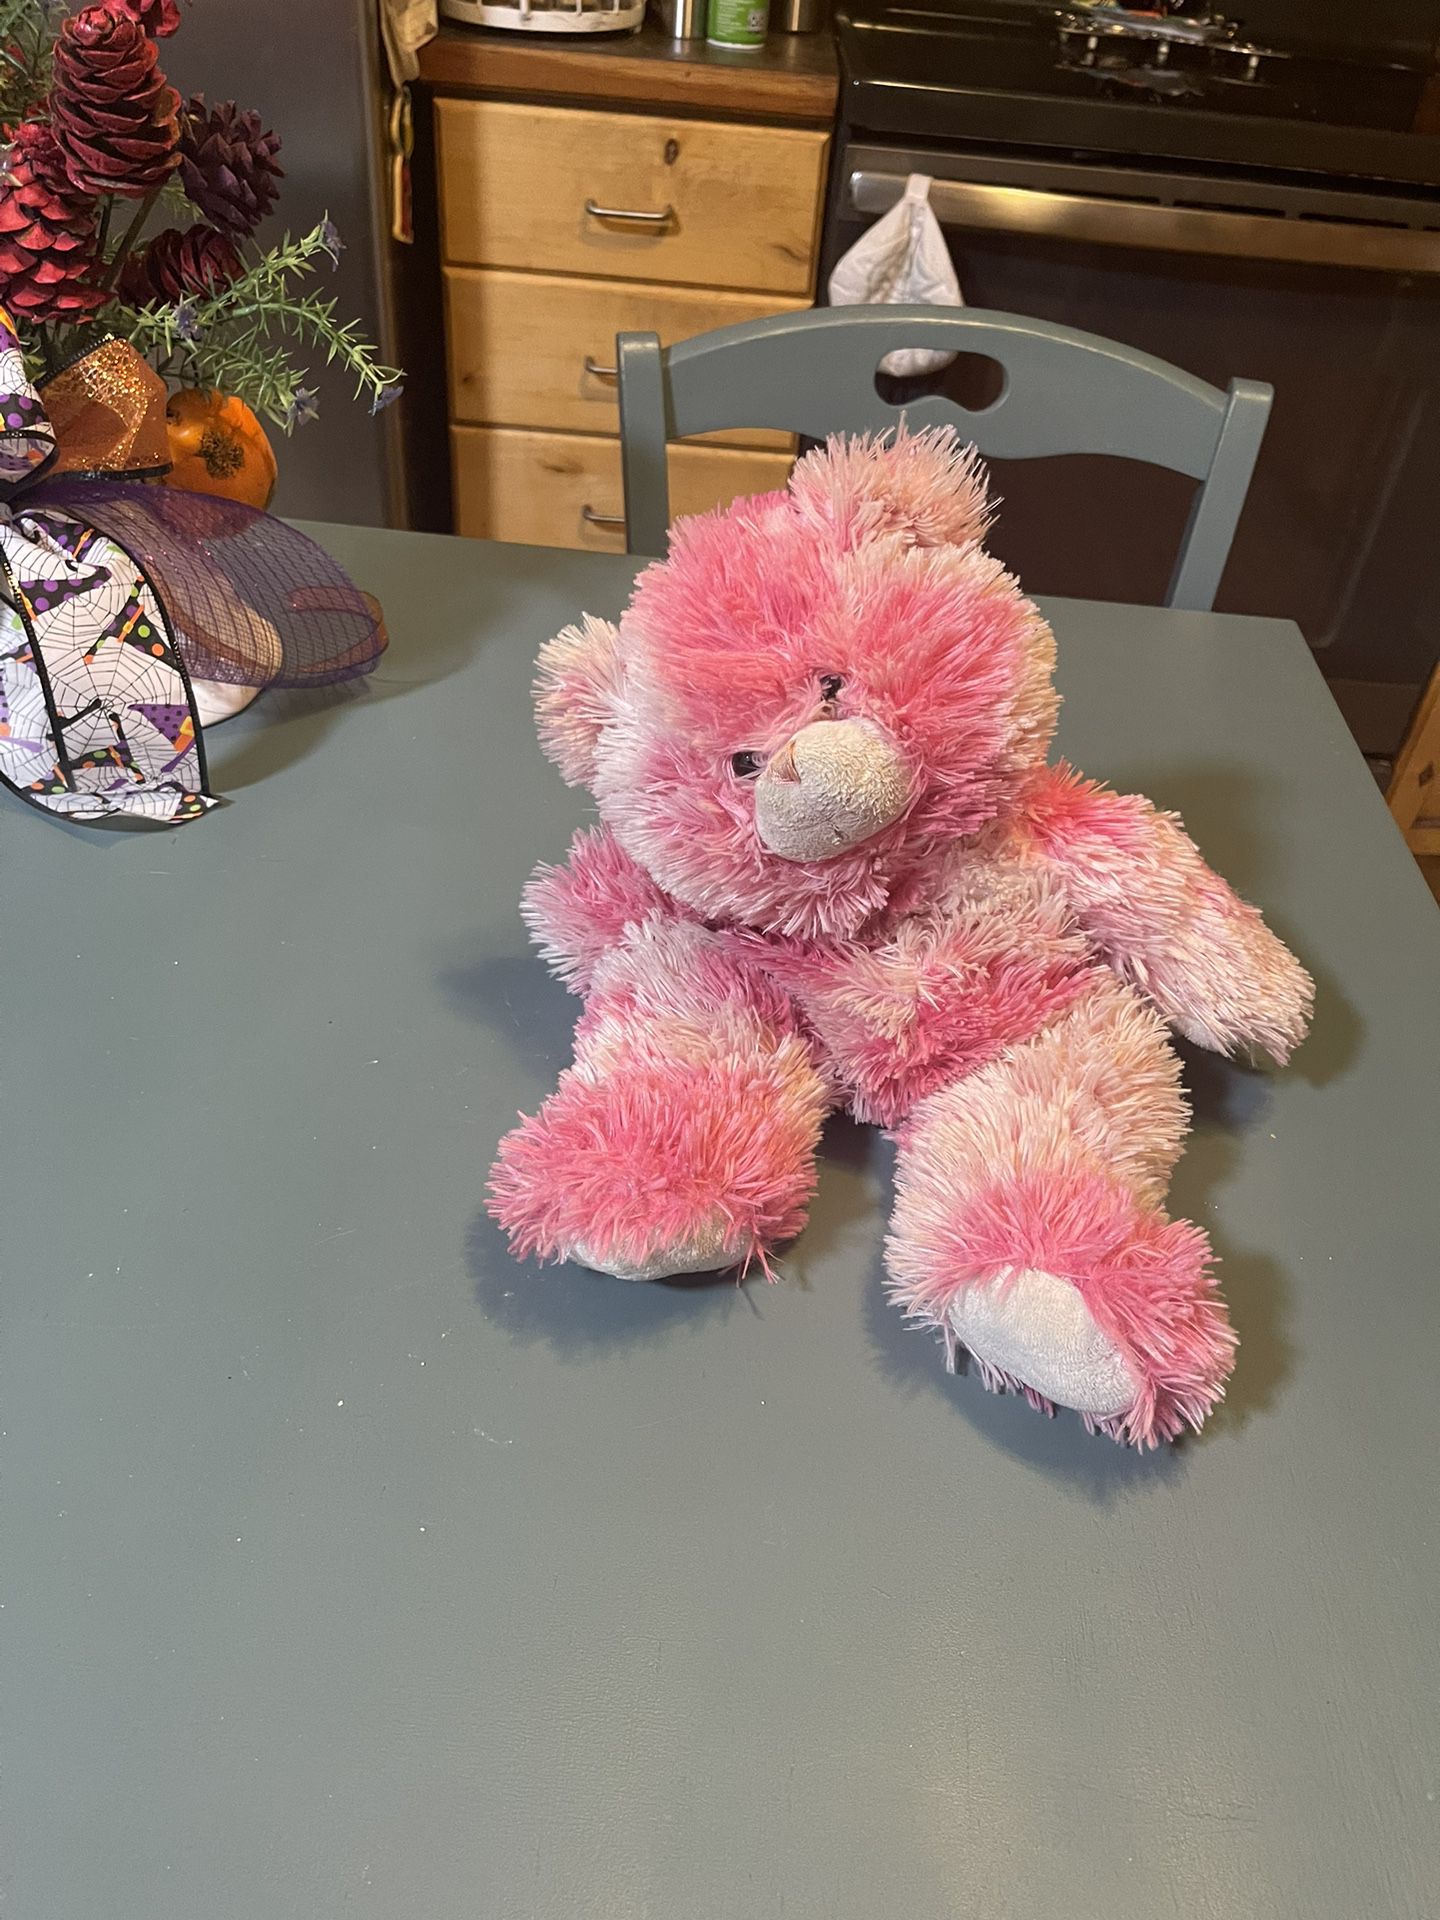 Teddy bear $5. No info on it. Has heavy bean bag like stuffing. Cash only. Everett/Melvin Ave./Broadway pick up area.